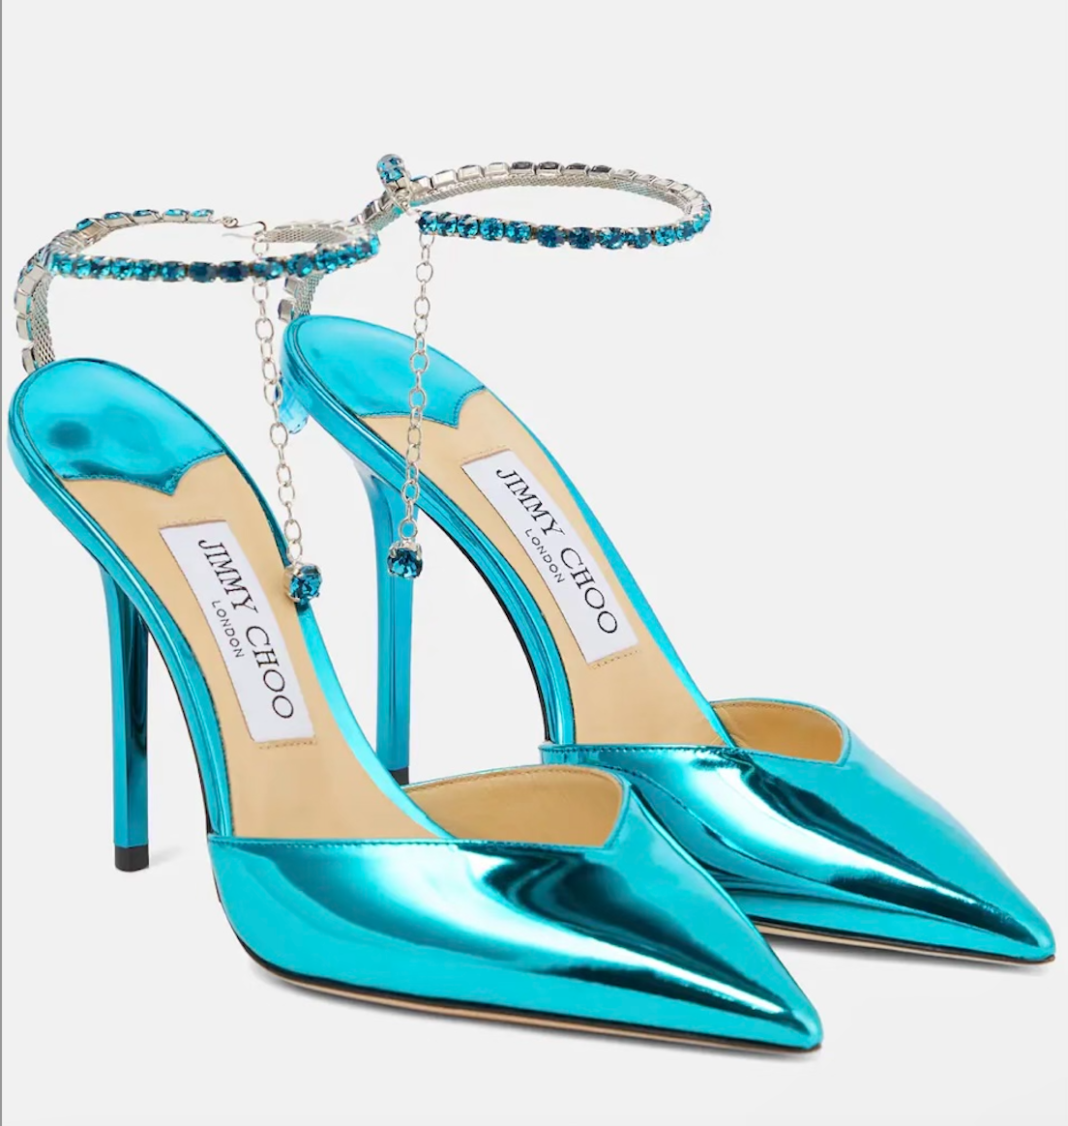 The Jimmy Choo ‘Saeda’ Vibrant Aqua Blue Pumps Are a Dazzling Addition to Your Shoe Candy